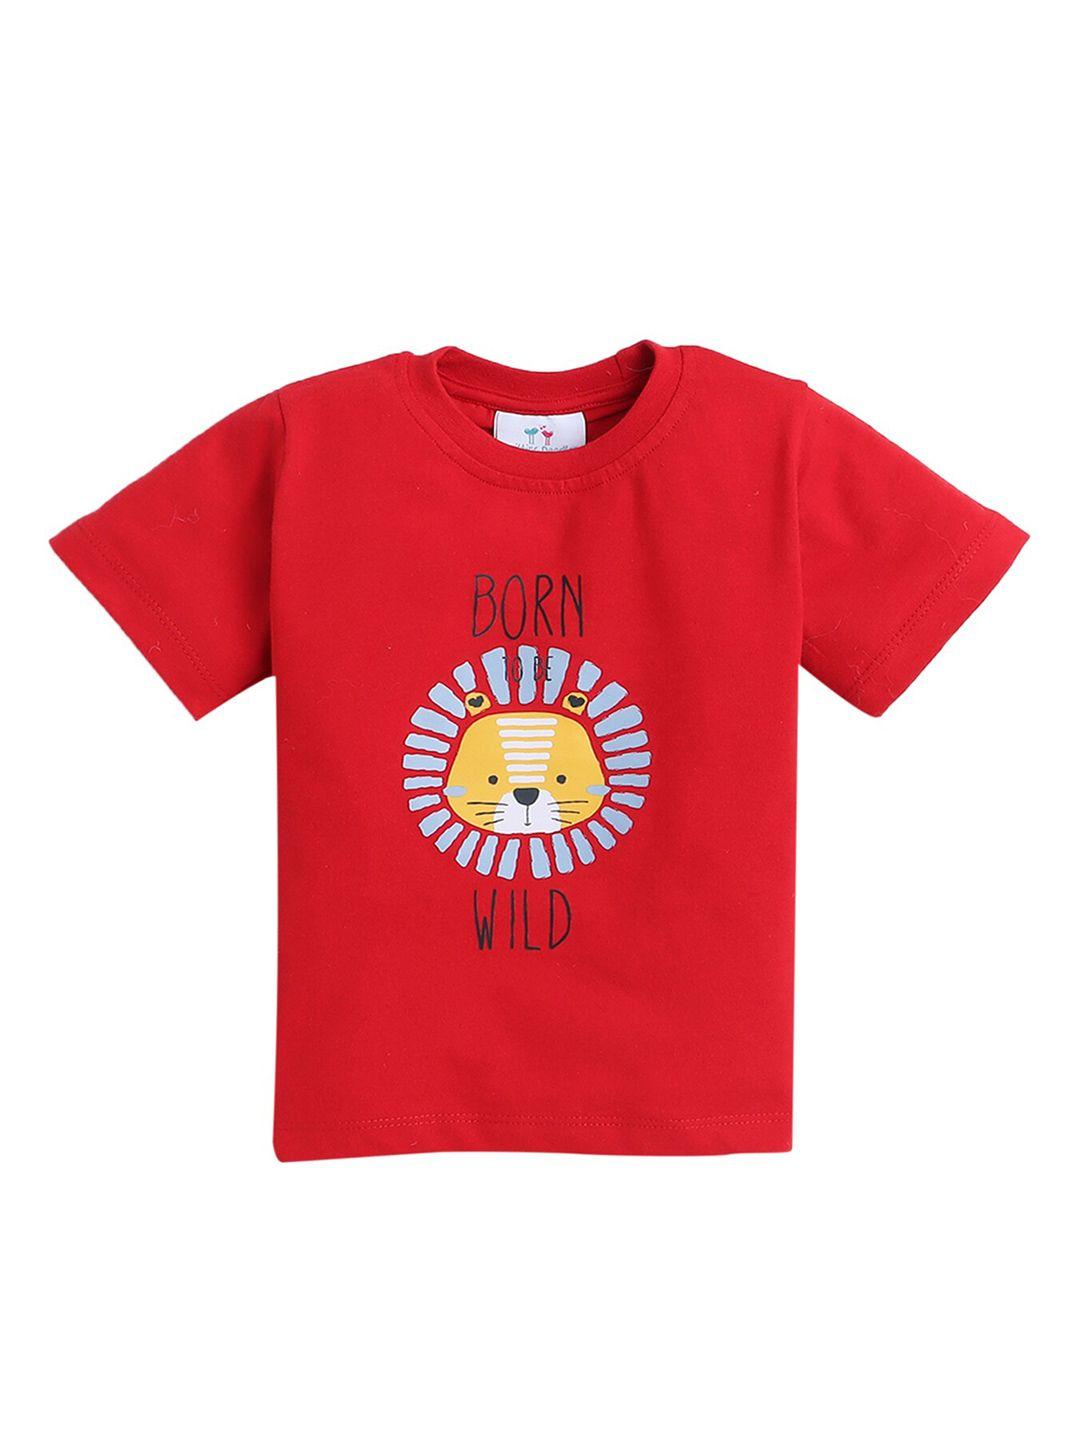 knitting-doodles-boys-born-to-be-wild-cub-printed-round-neck-regular-fit-cotton-t-shirt